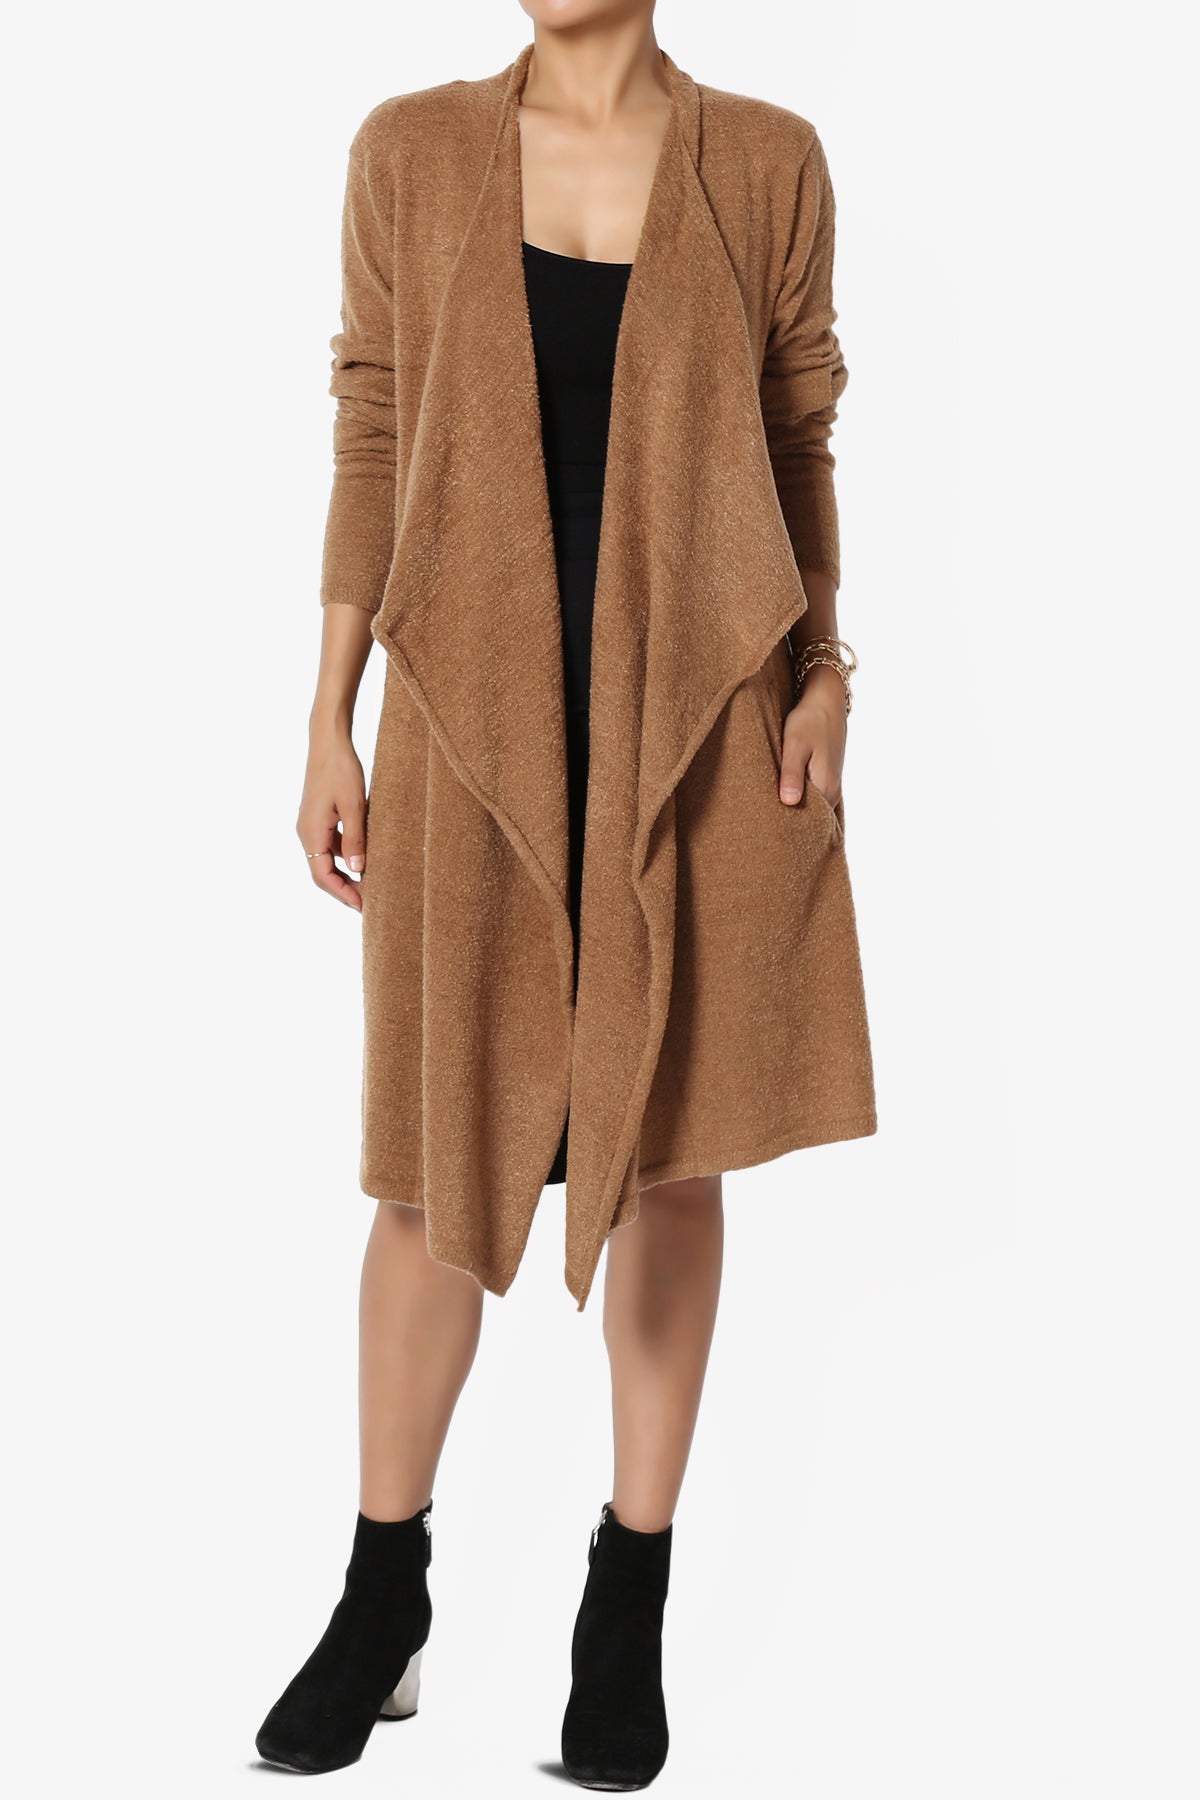 Let's Get Going Cardigan Sweater - Camel